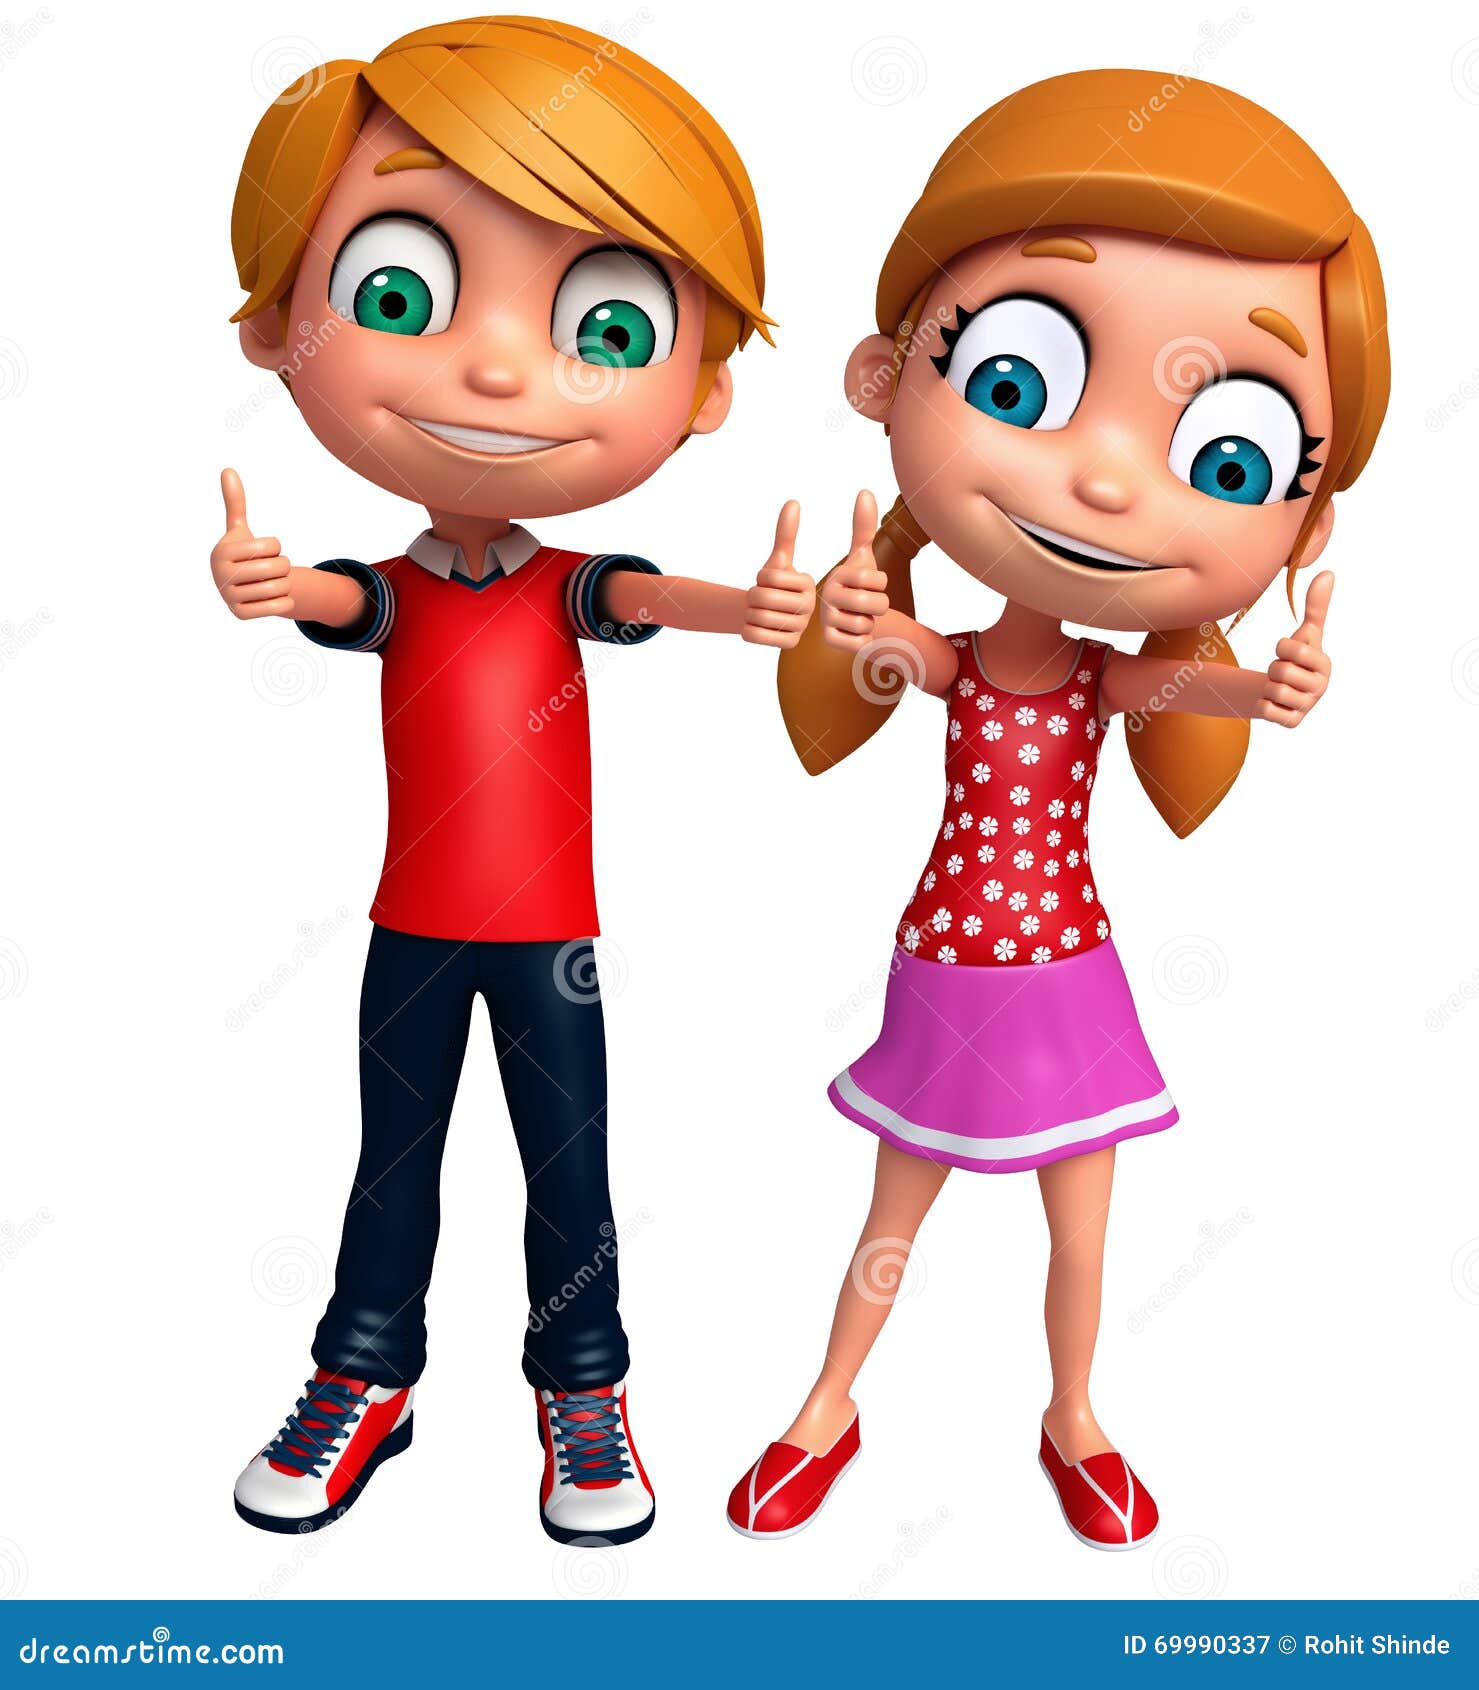 3d render of little boy and girl with thums up pose